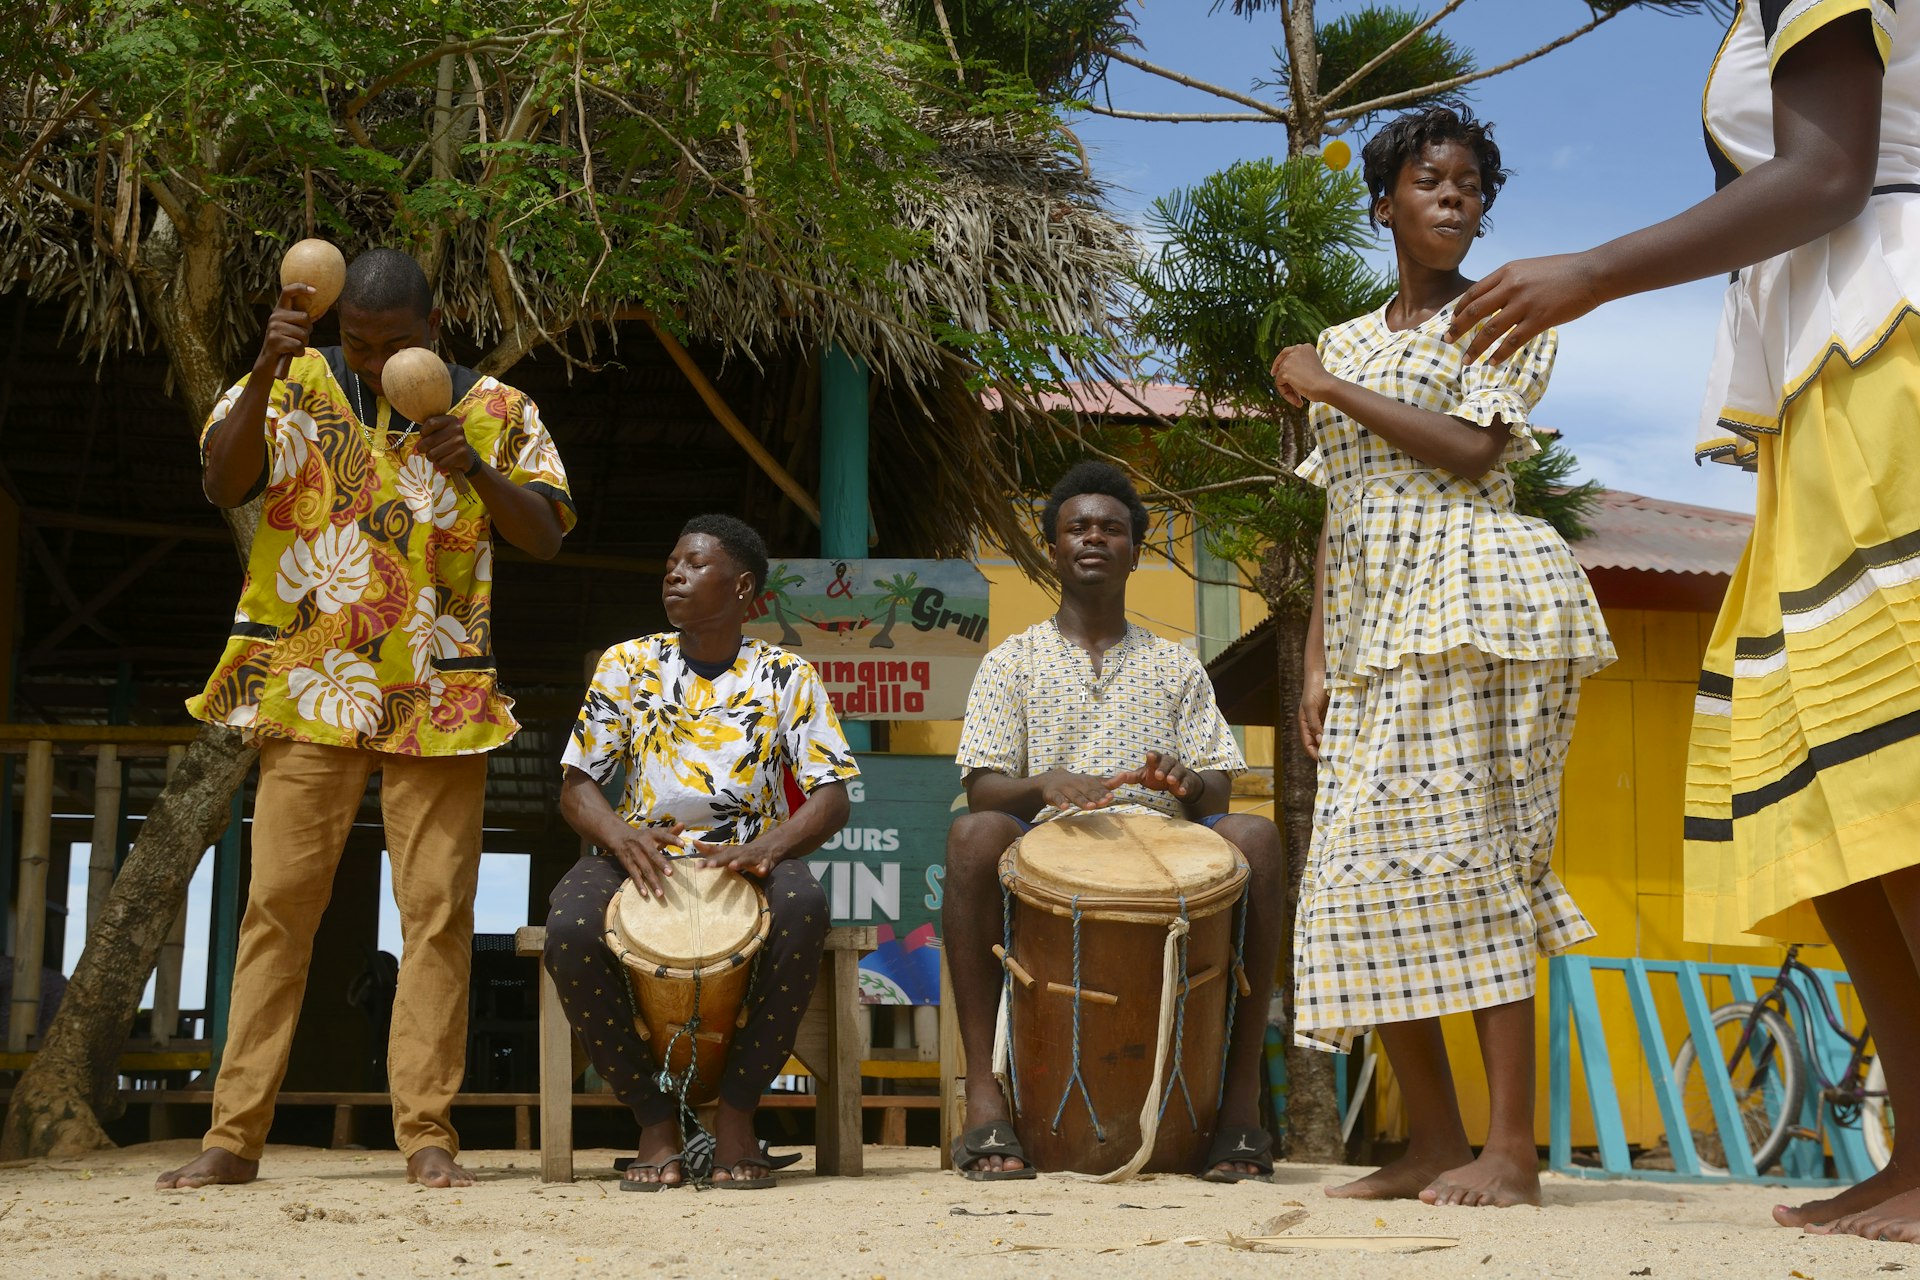 Garifuna troupe performs traditional songs with drumming and dancing in Hopkins Village, Belize